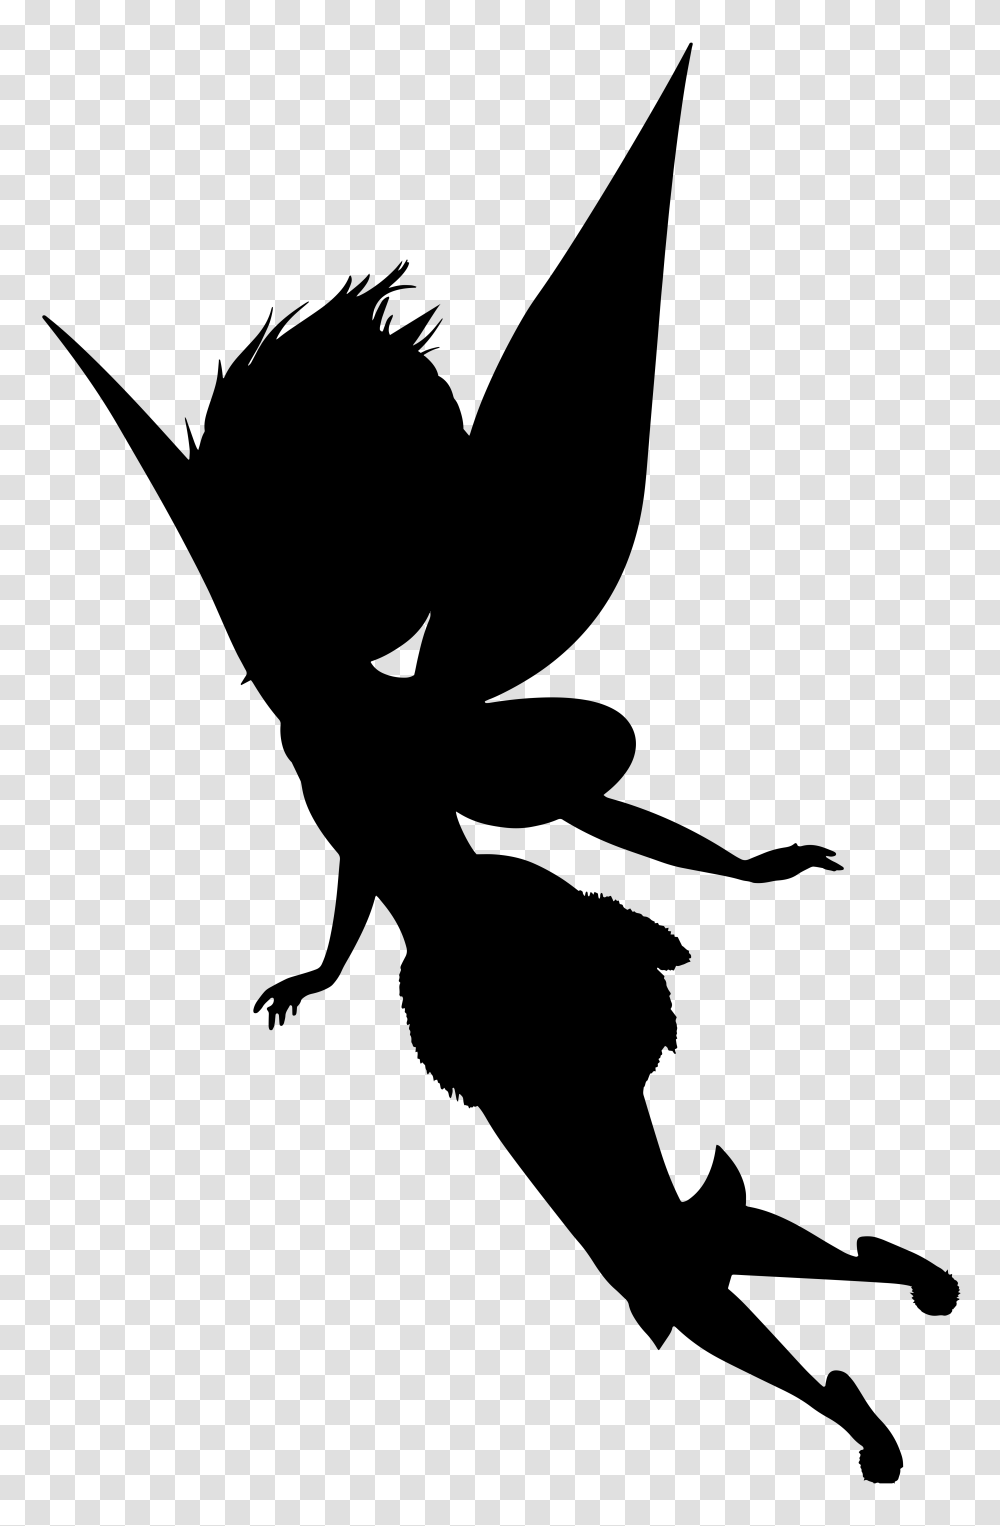 Image Result For Free Fairy Silhouette Fairies, Cross, Number Transparent Png